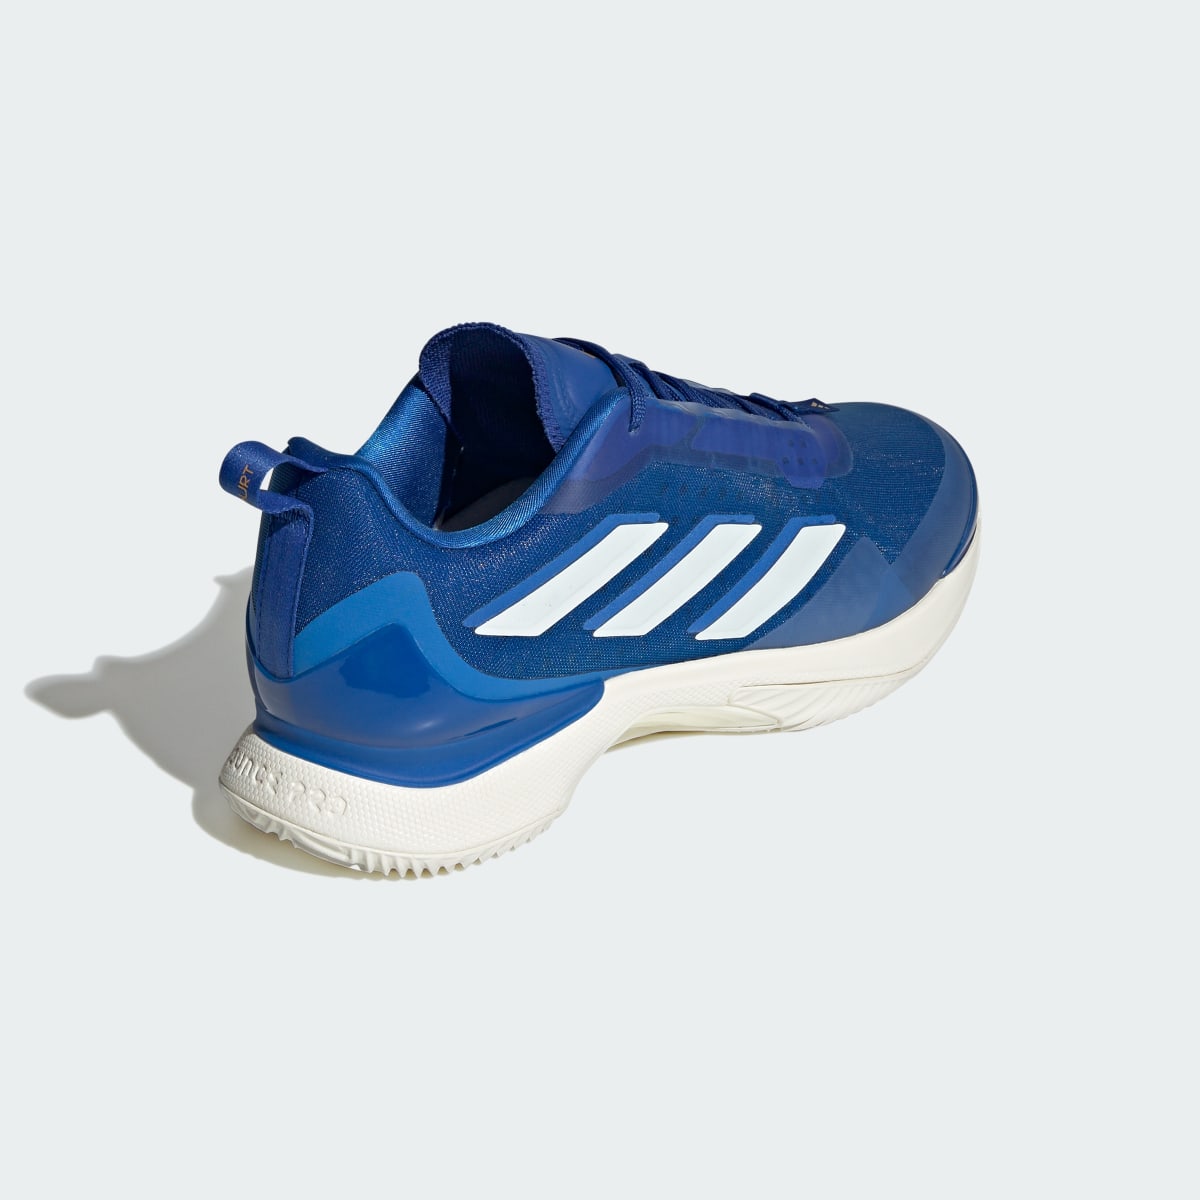 Adidas Avacourt Clay Court Tennis Shoes. 6